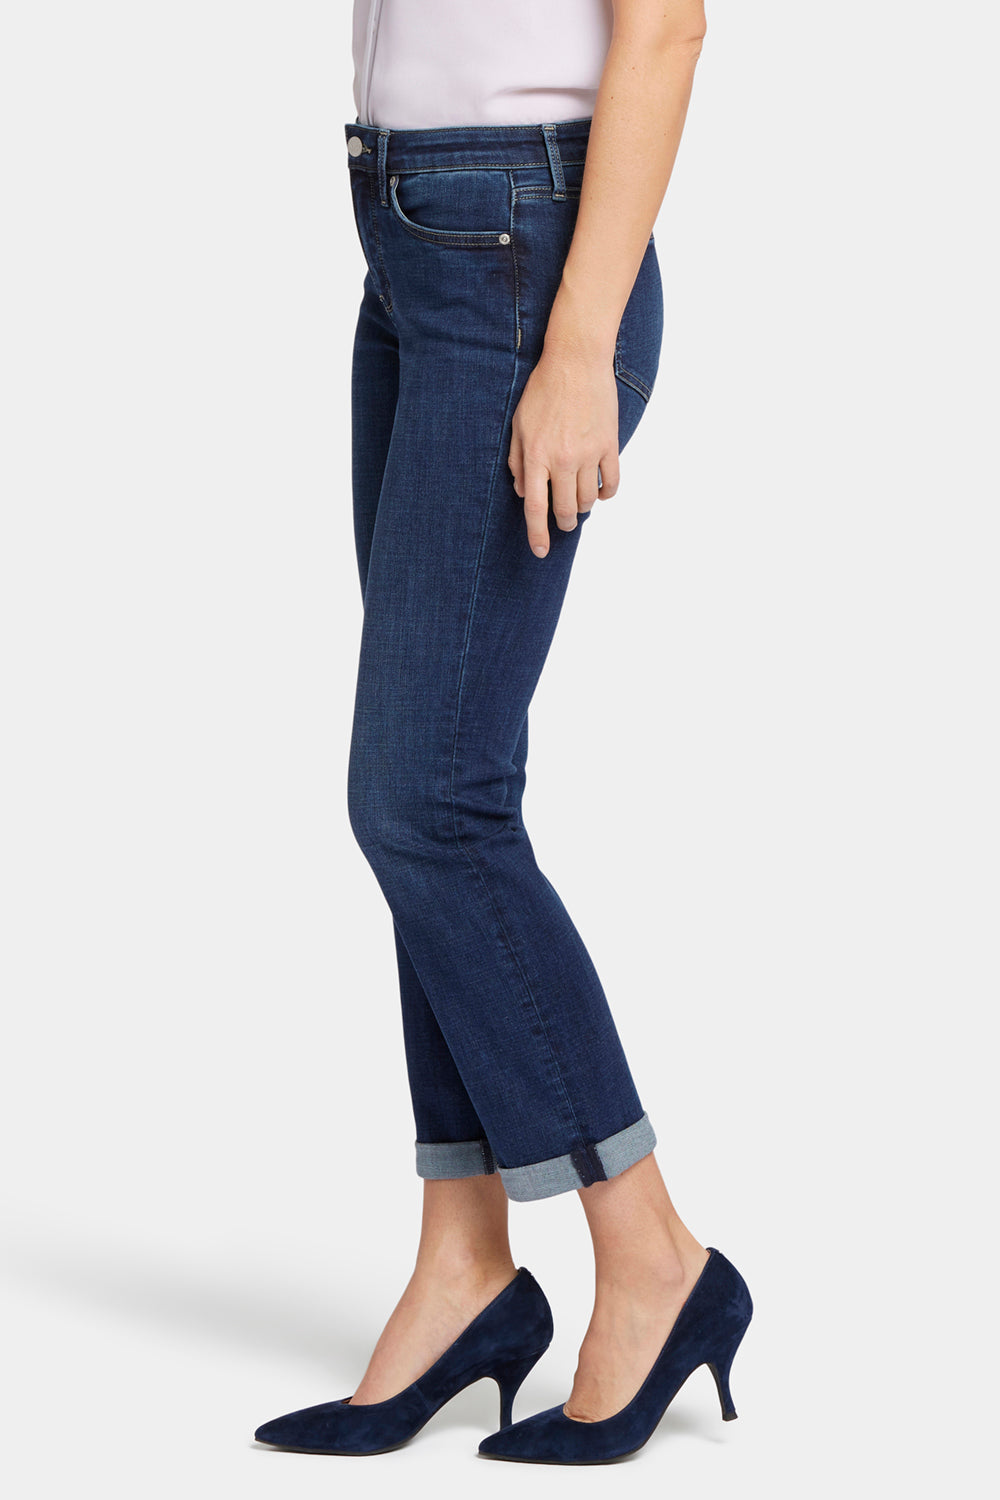 NYDJ Sheri Slim Ankle Jeans With Roll Cuffs - Cambridge